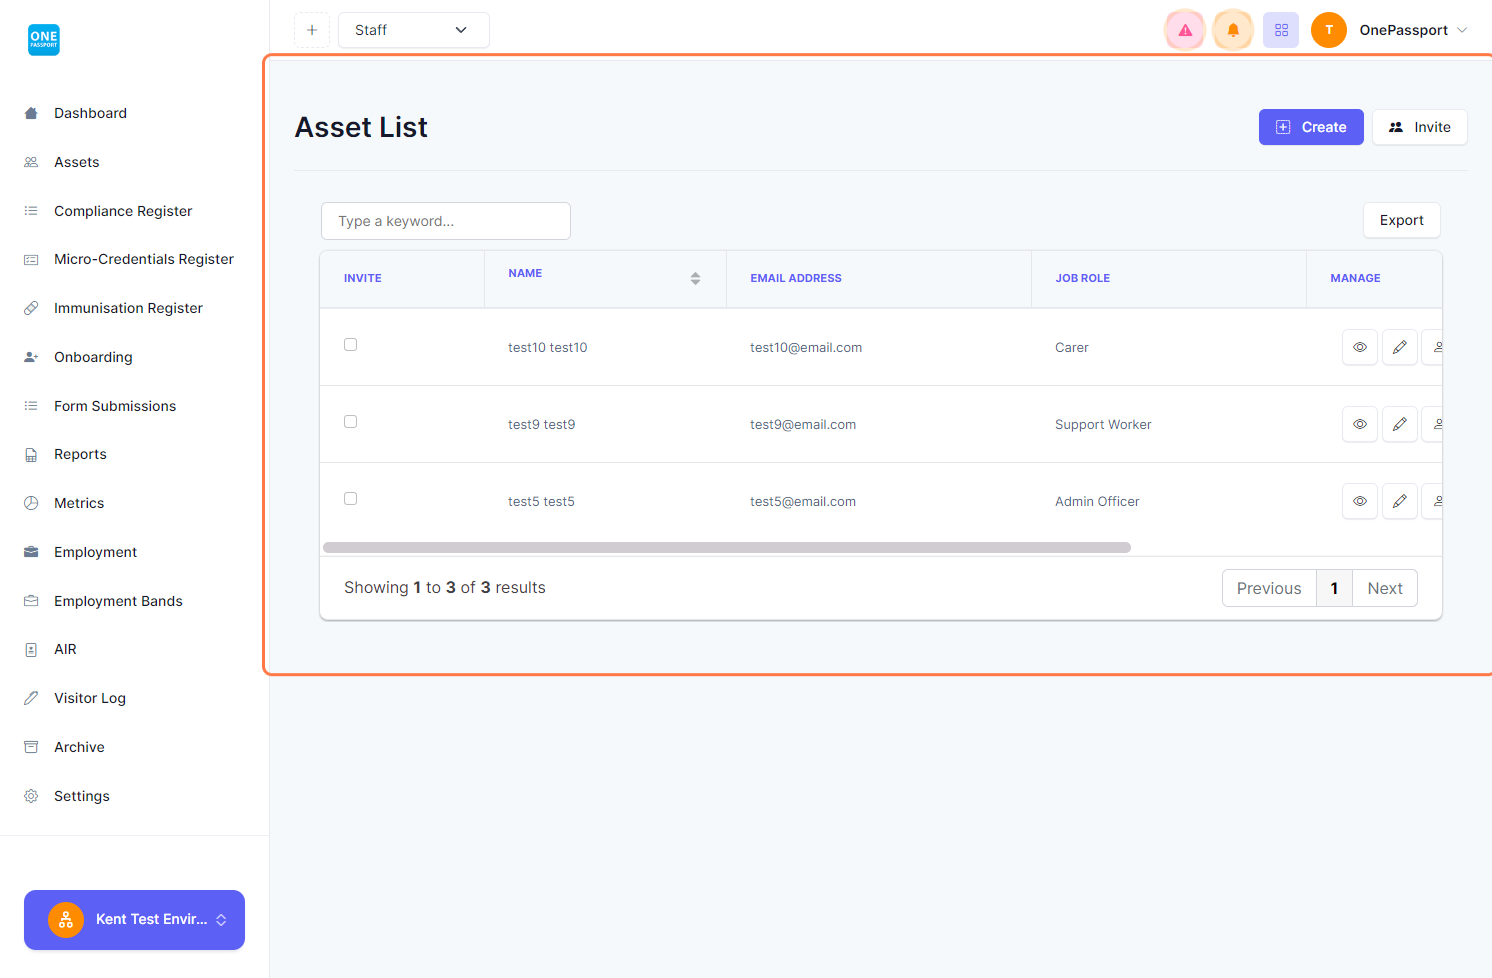 Go to the Asset List page. Under the Manage column are the buttons to view personal information, Edit, go to the Profile page, Invite, and Delete asset/workers.